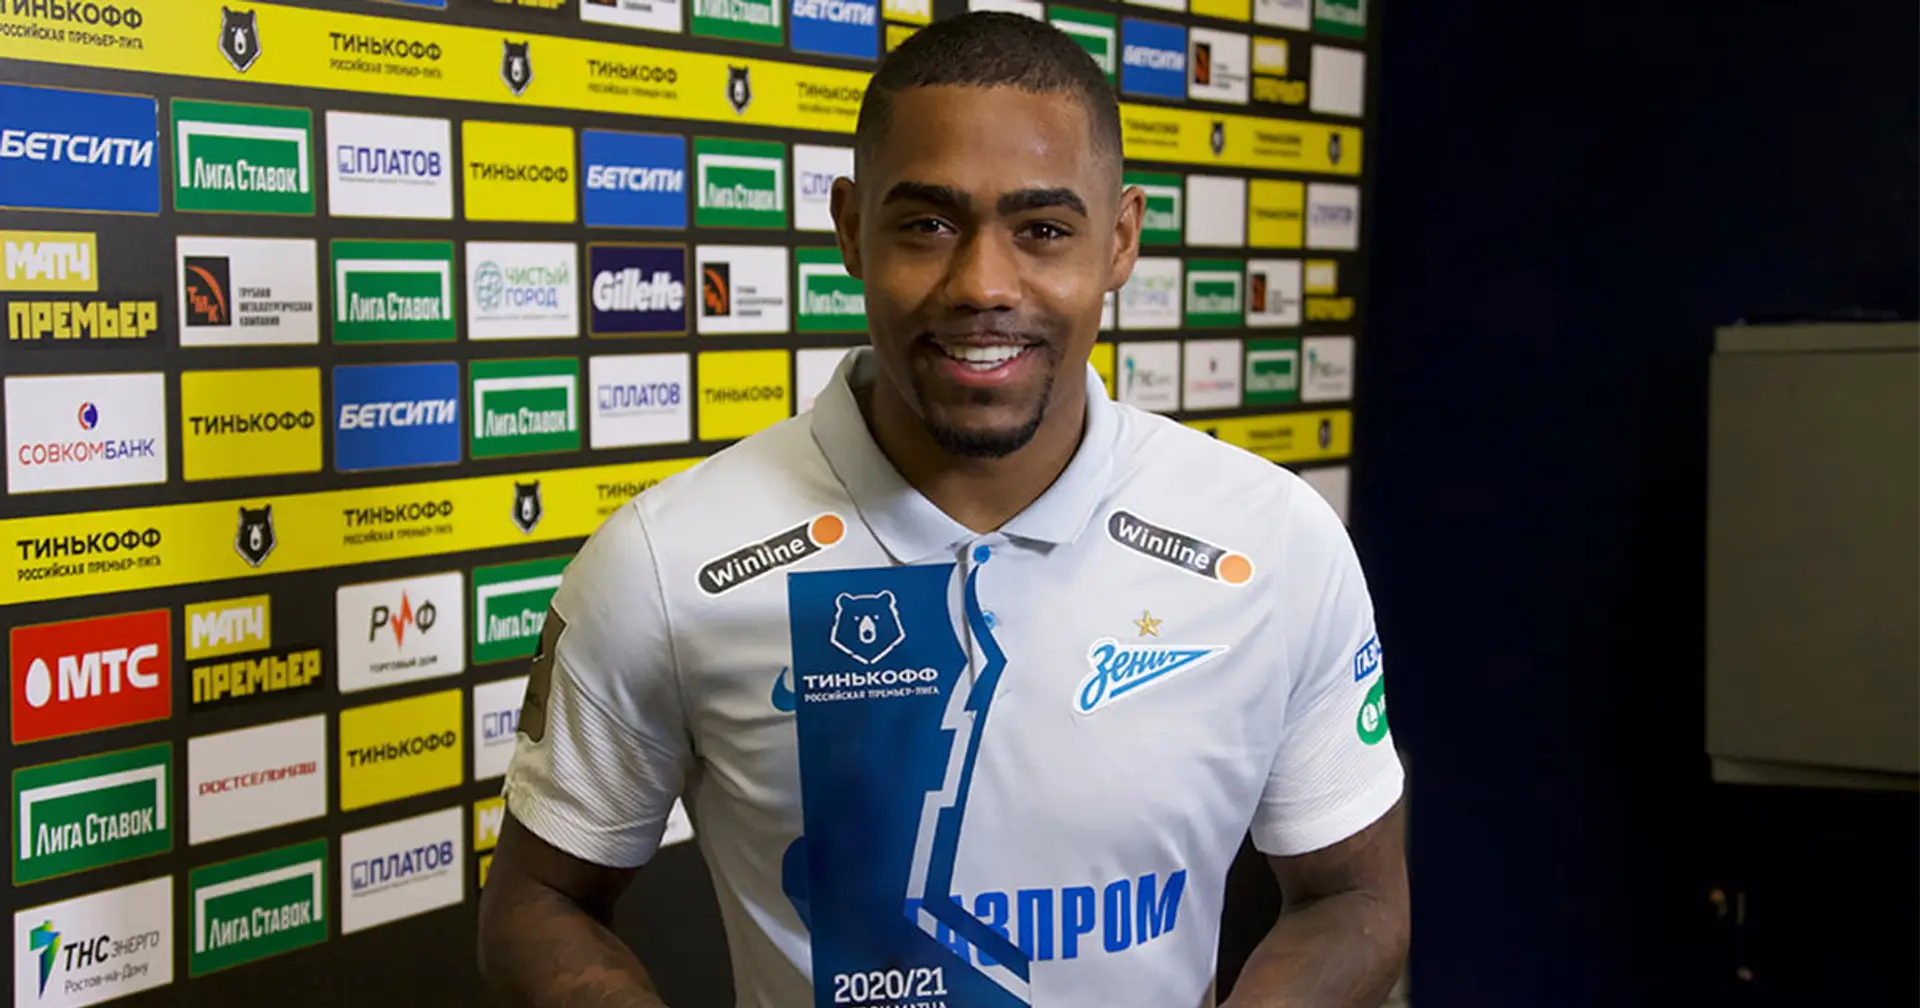 Found his spot: Malcom wins Zenit's Player of the Month award for 3rd straight time